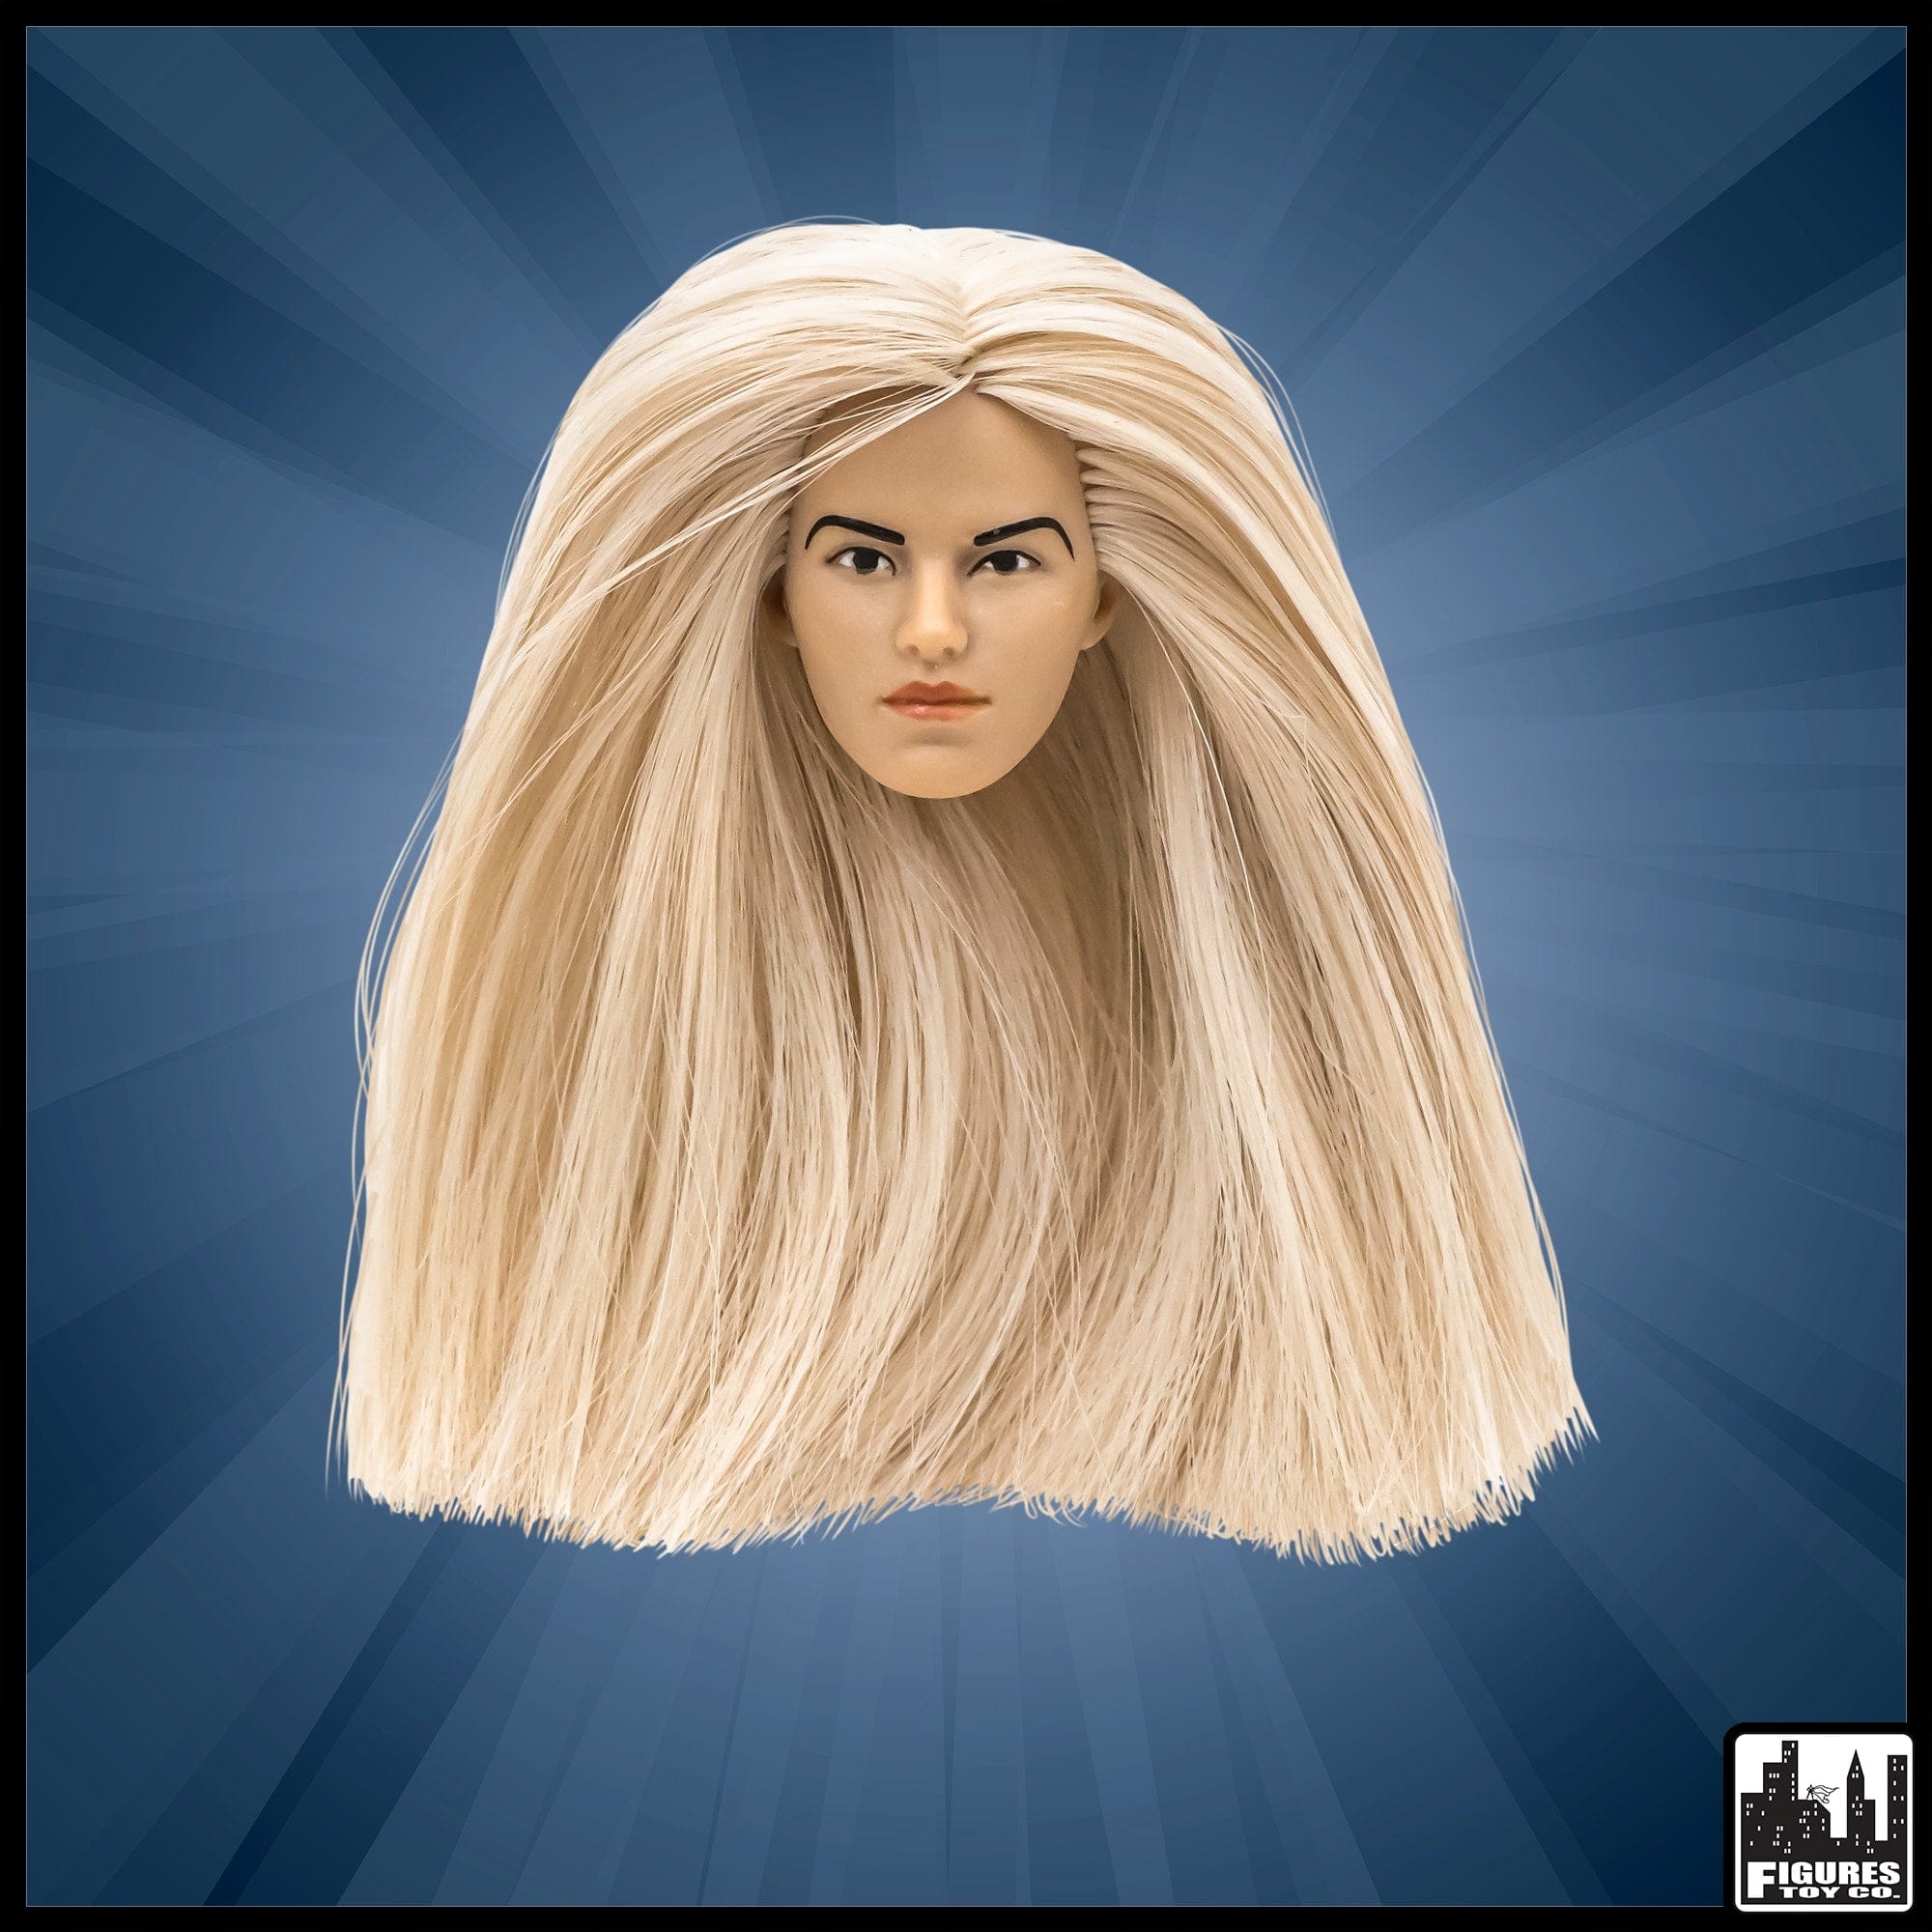 White FEMALE Interchangeable Wrestling Action Figure Head With Long Blonde Hair